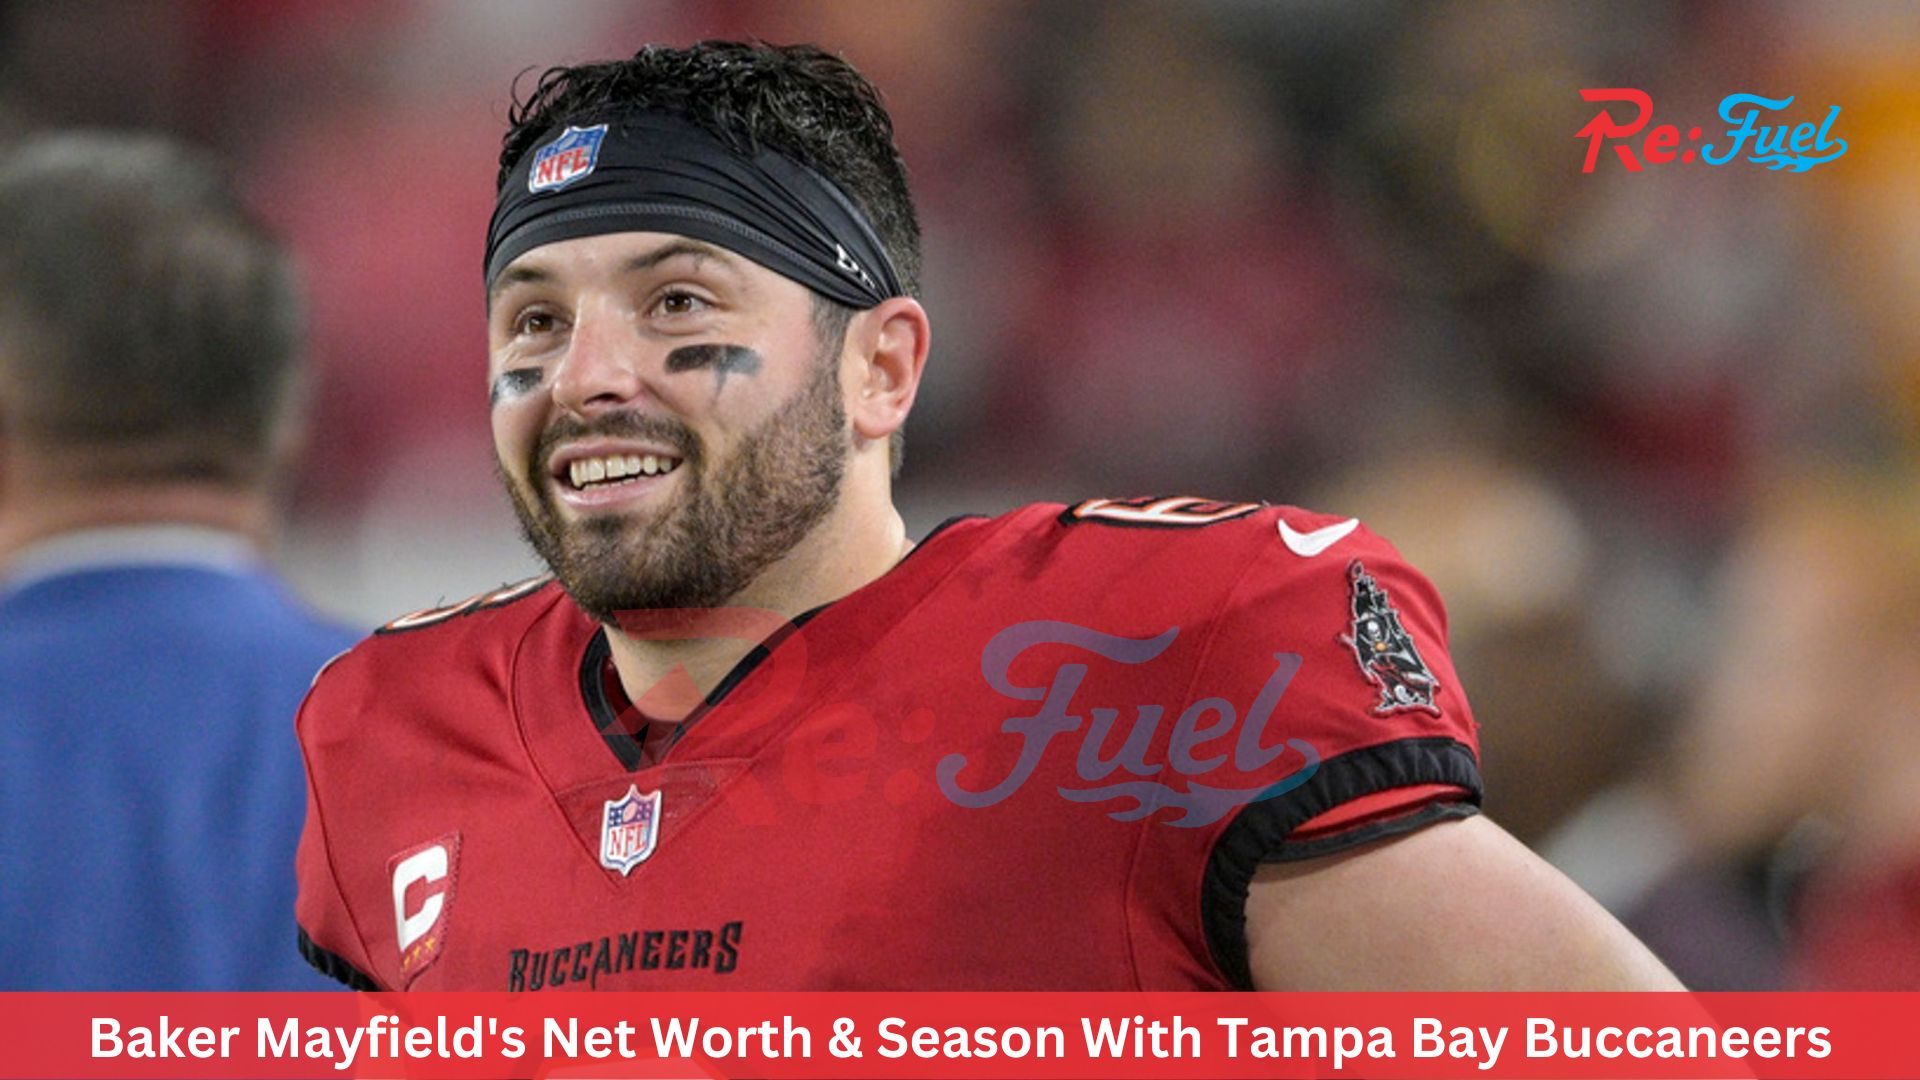 Baker Mayfield's Net Worth & Season With Tampa Bay Buccaneers